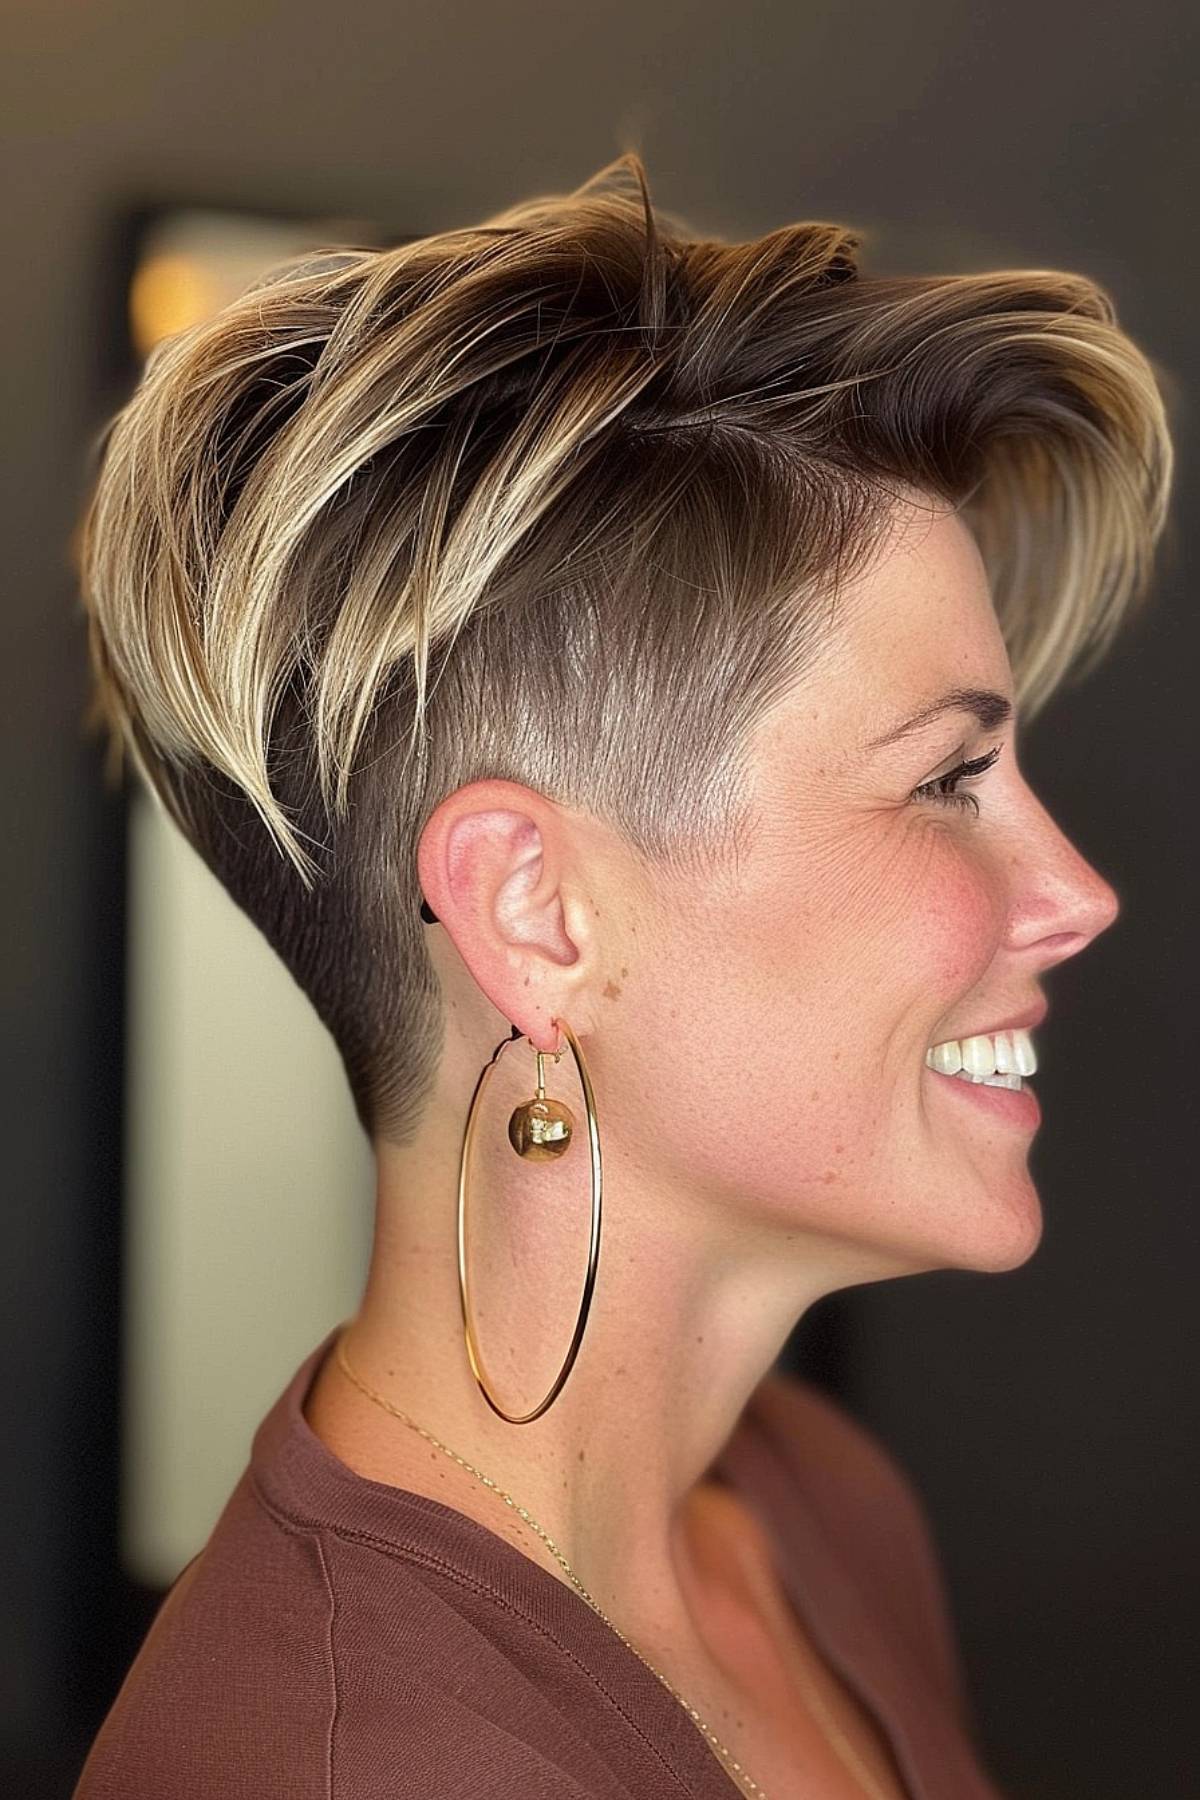 A woman with an angular pixie cut with an undercut. The textured top gives a modern and fashionable look.